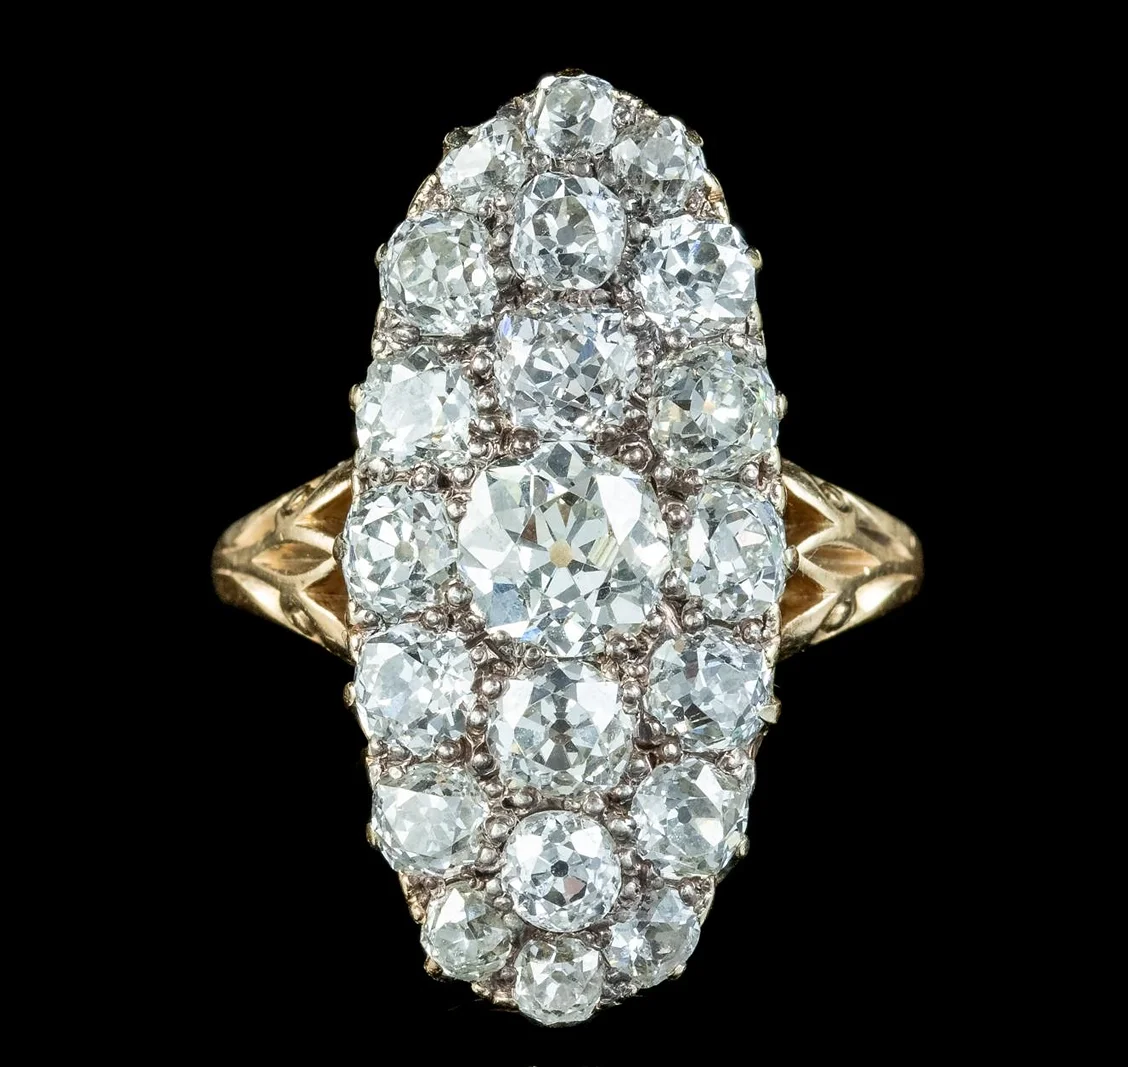 An antique Victorian diamond cluster engagement ring